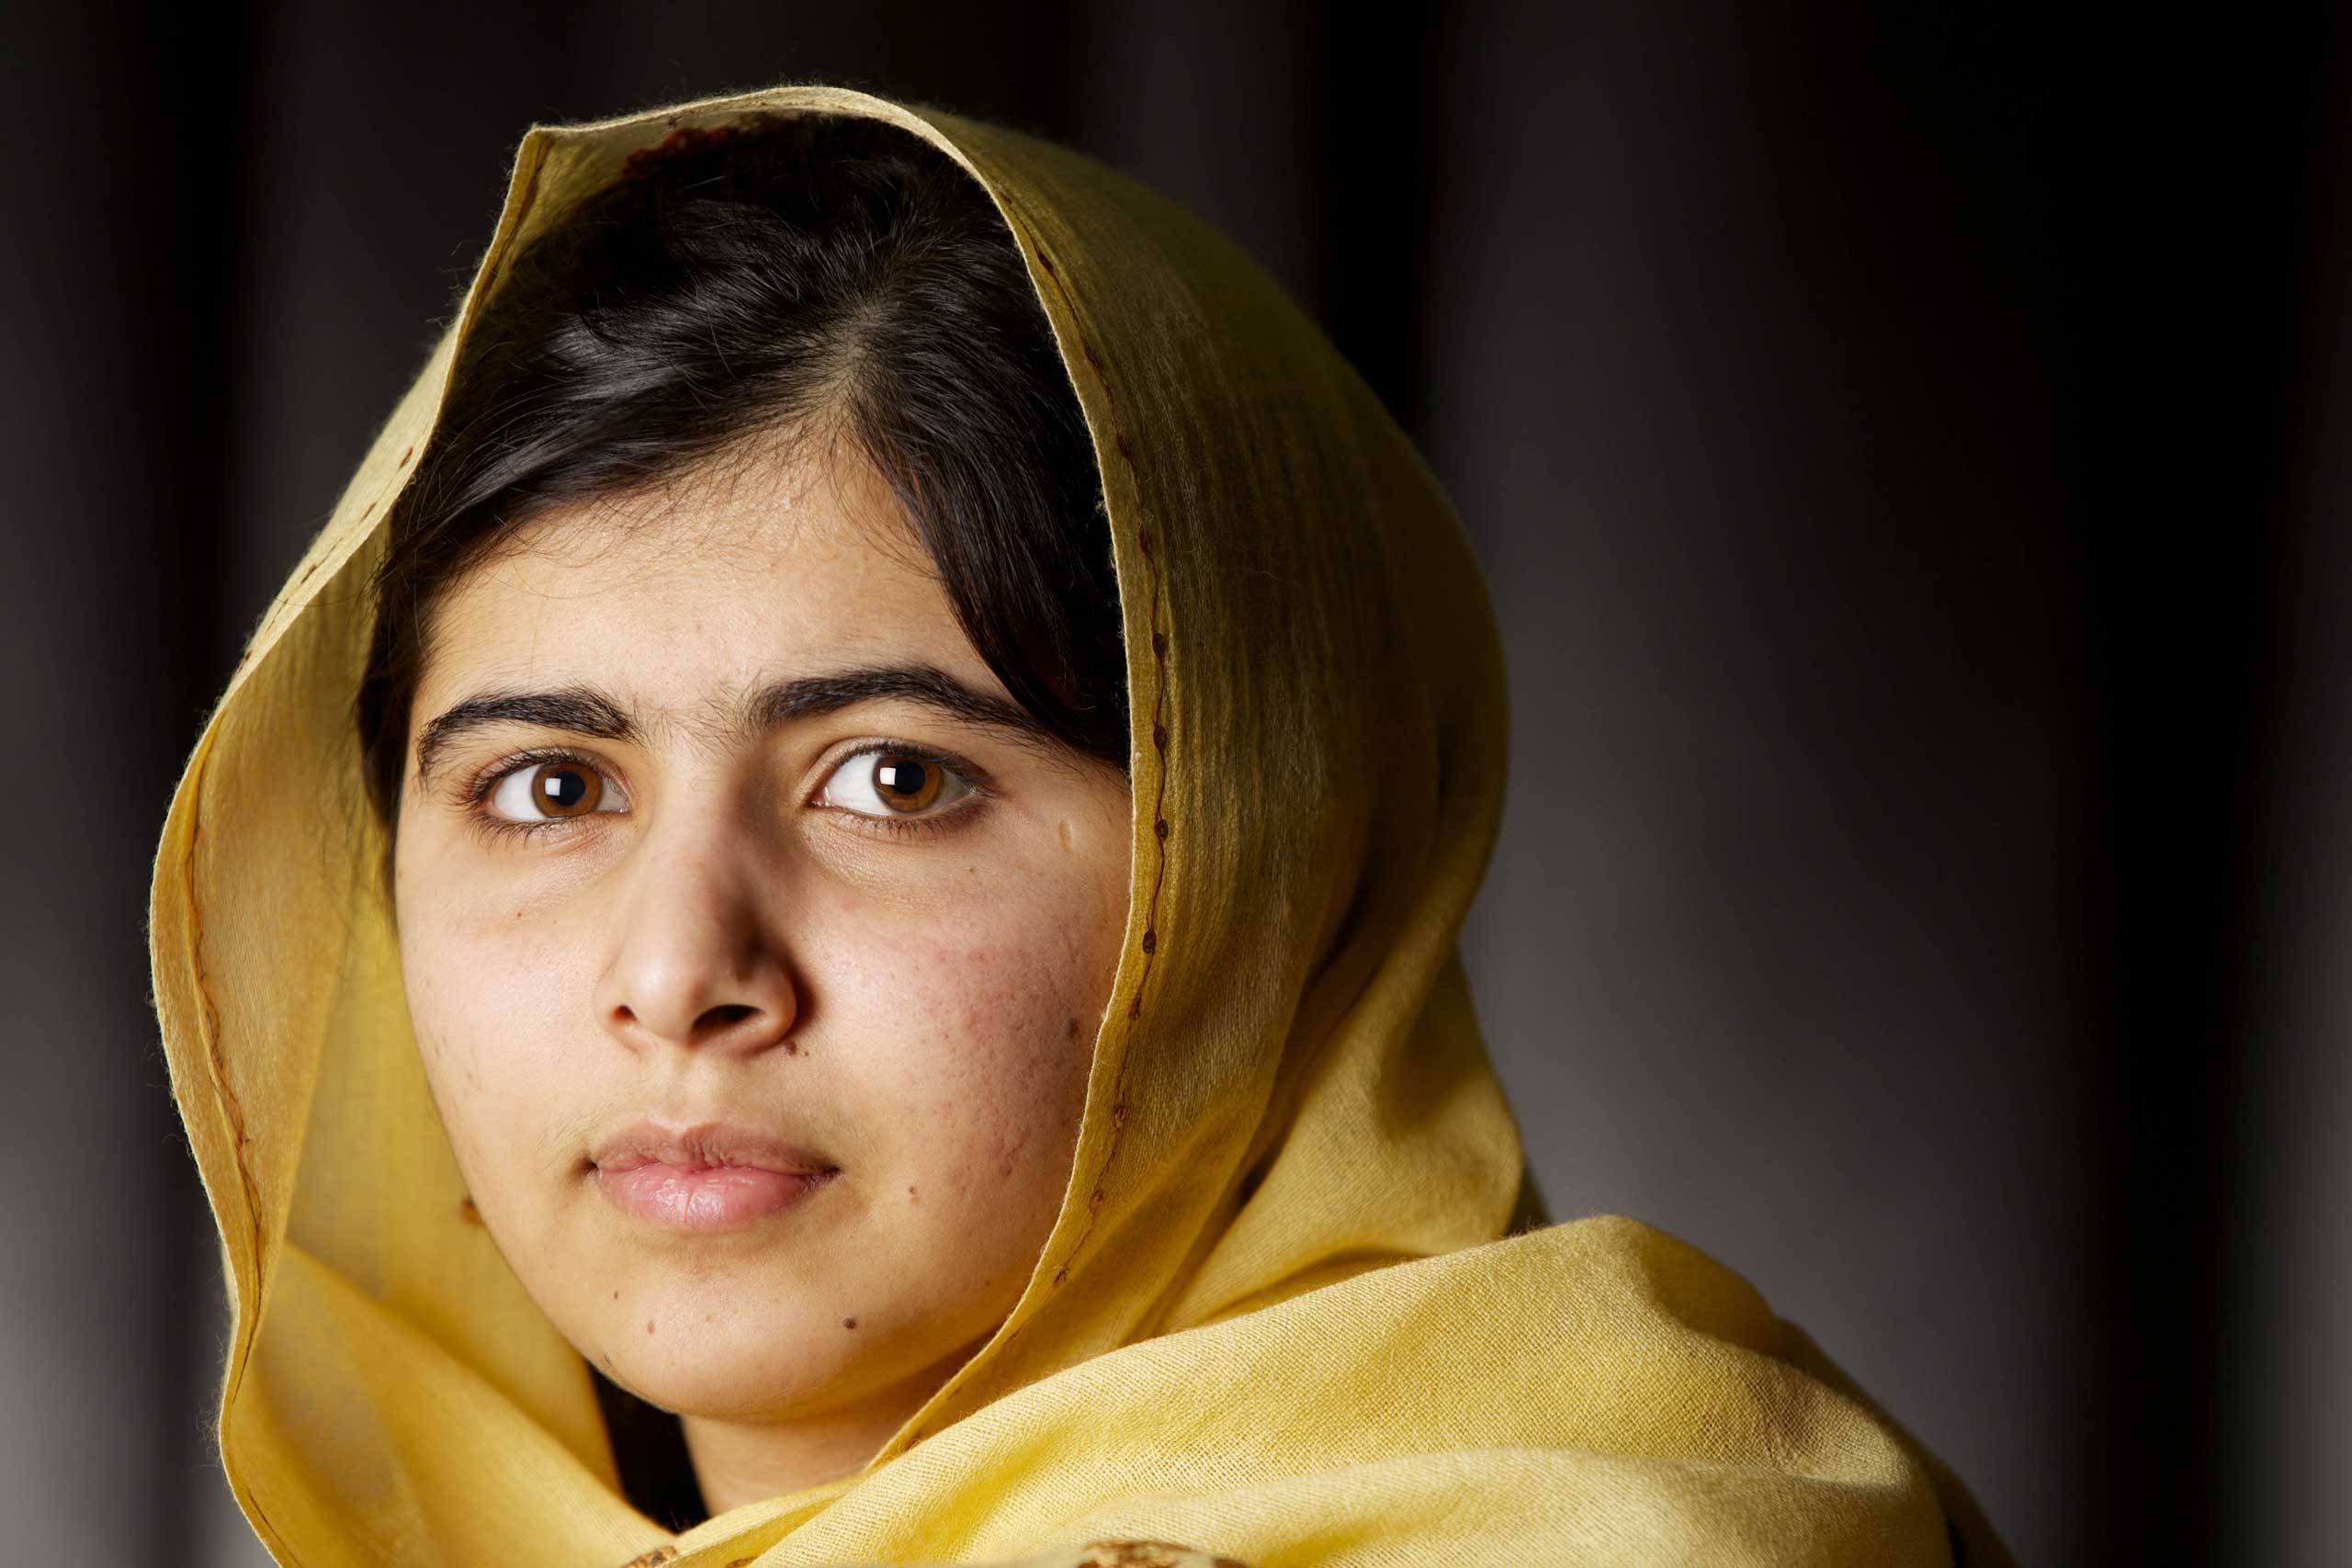 Malala Yousafzai A Name That Describes The True Meaning Of Humanity